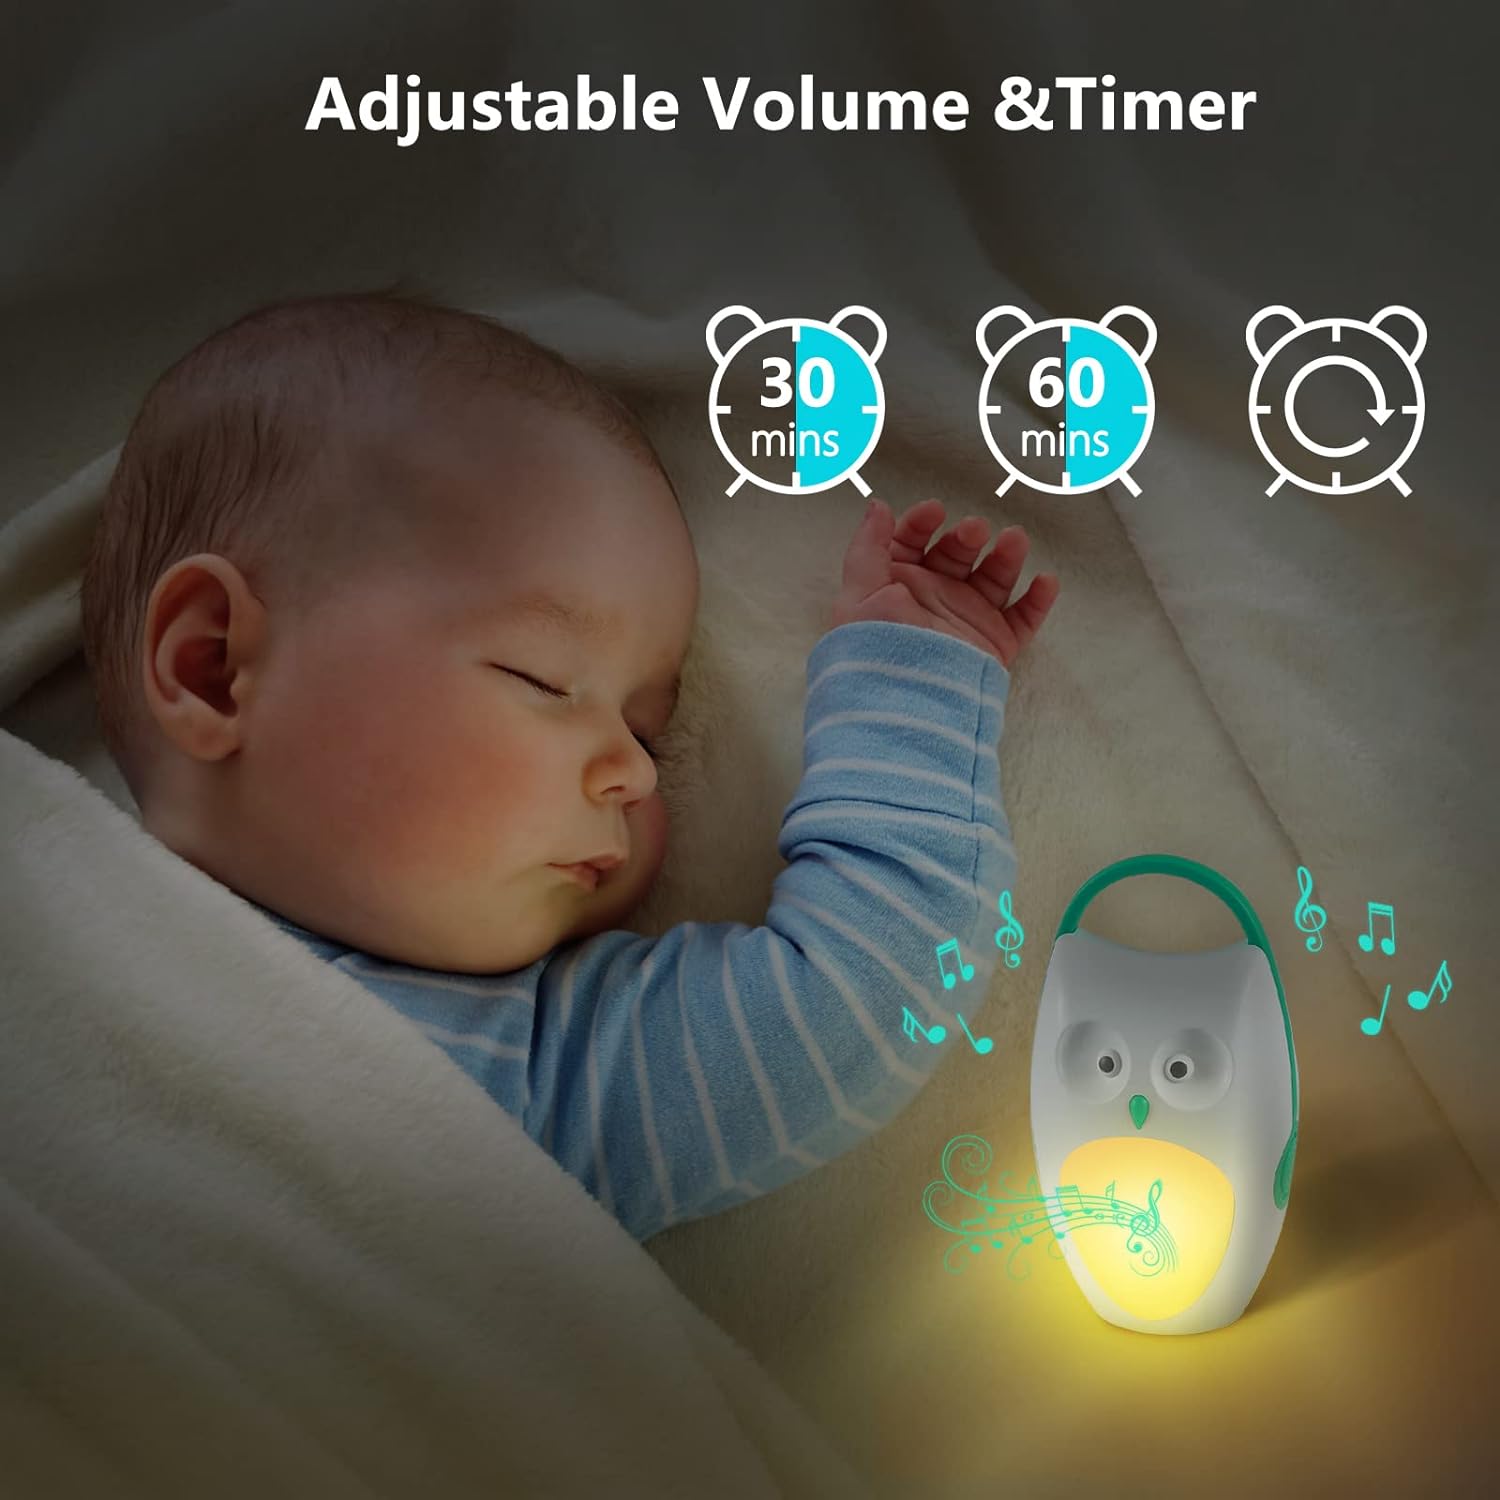 SOAIY Baby Sleep Soother Shusher Sound Machines, Baby Gift, Rechargeable Portable White Noise Machine with Night Light, 8 Soothing Sounds and 3 Timers for Traveling, Sleeping, Baby Carriage (owl)